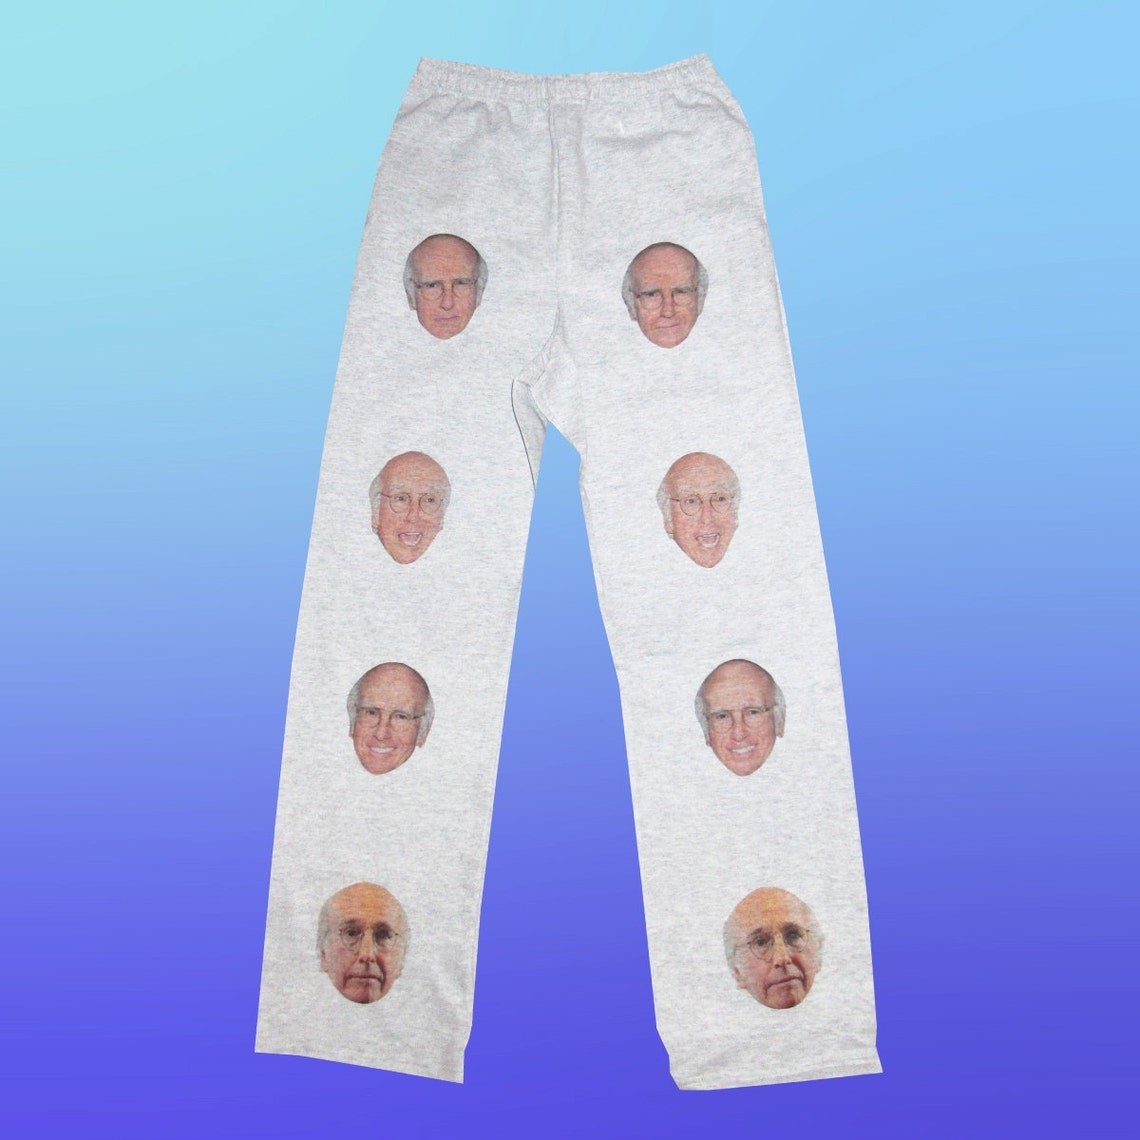 sweatpants with various larry david faces on them